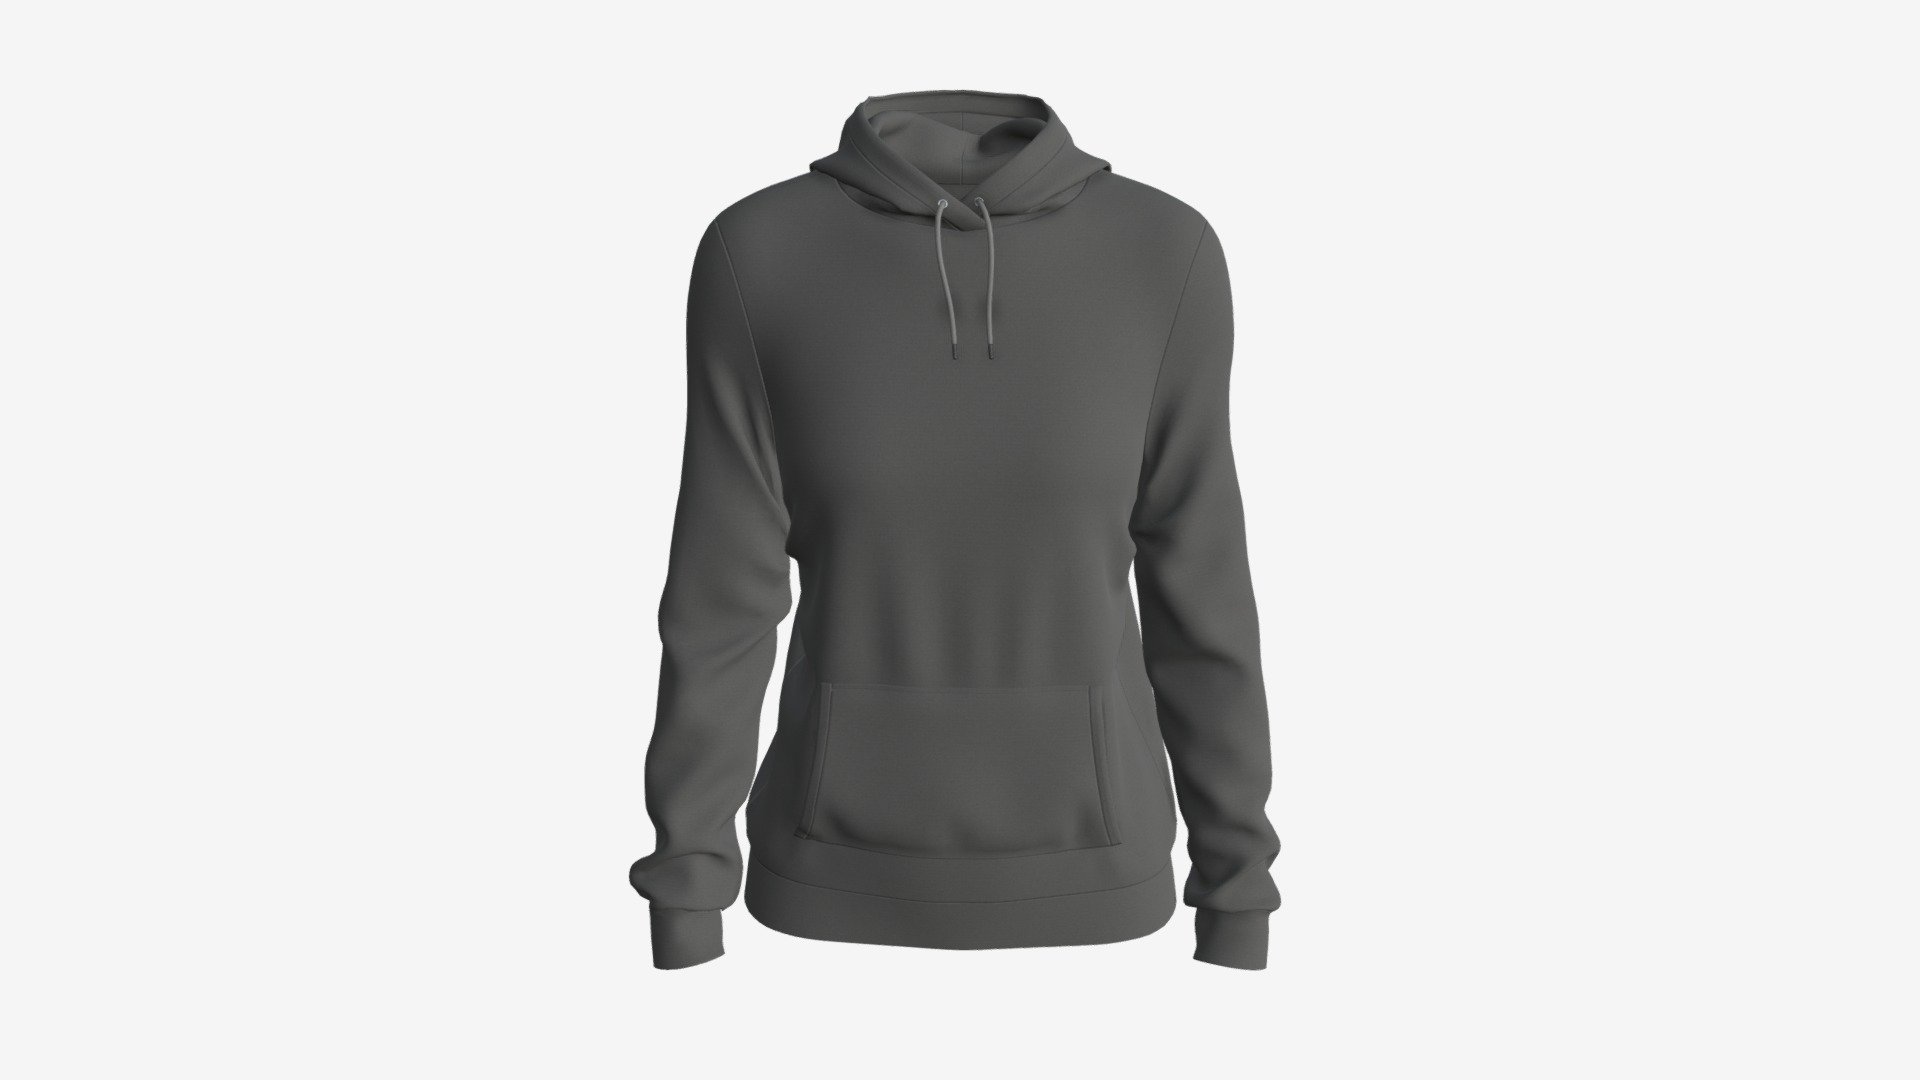 Hoodie with Pockets for Women Mockup 01 Black - Buy Royalty Free 3D ...